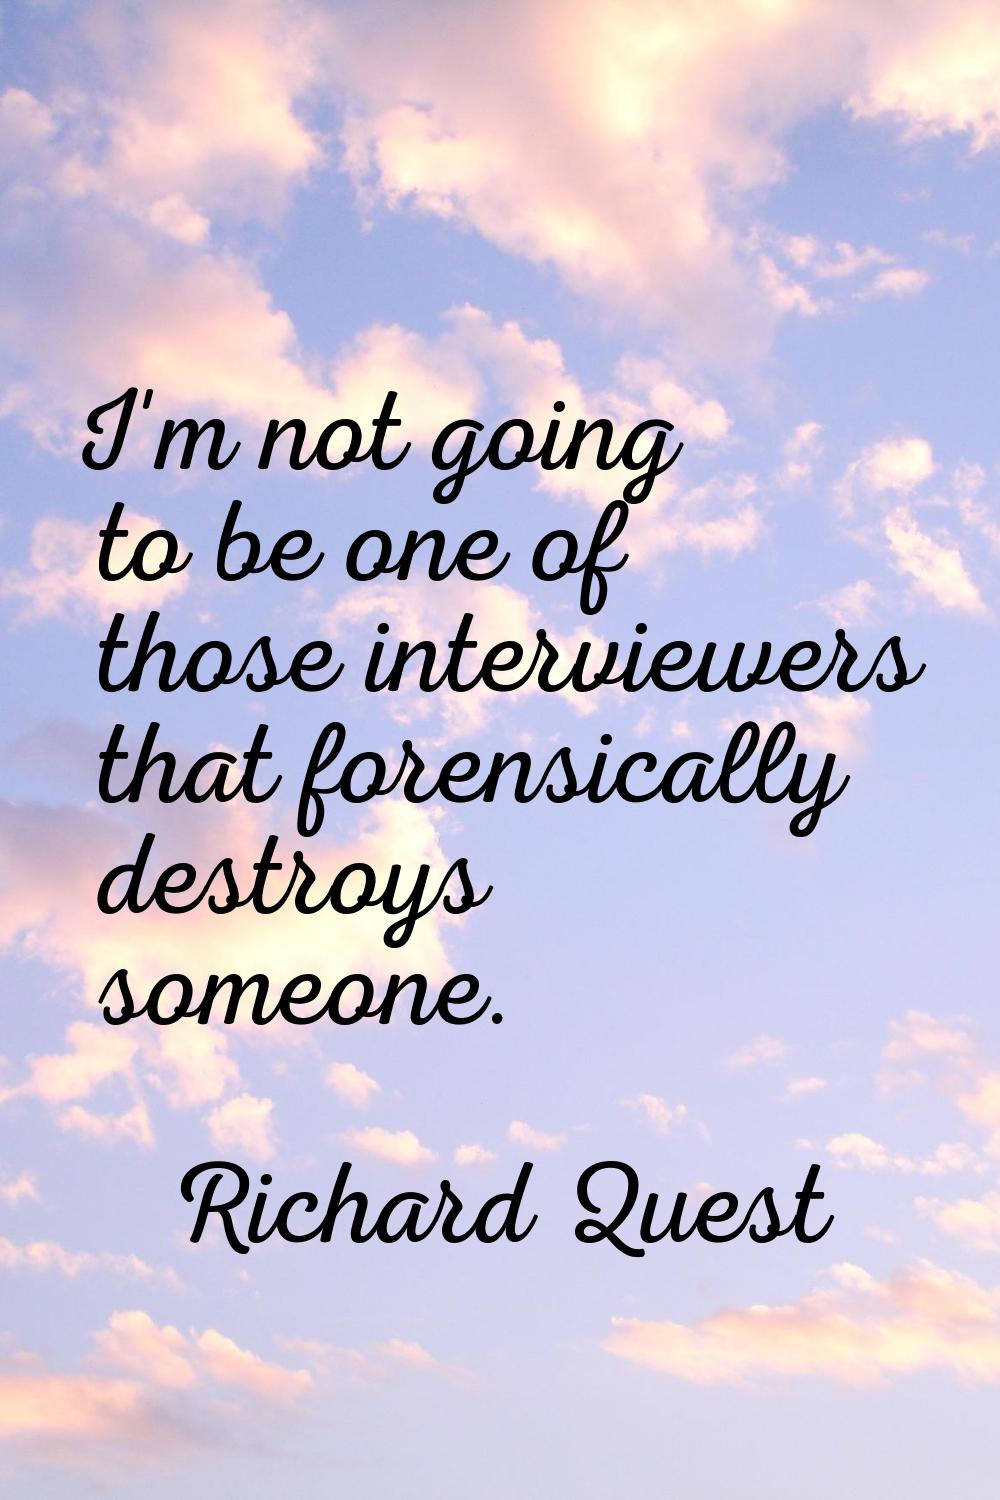 I'm not going to be one of those interviewers that forensically destroys someone.